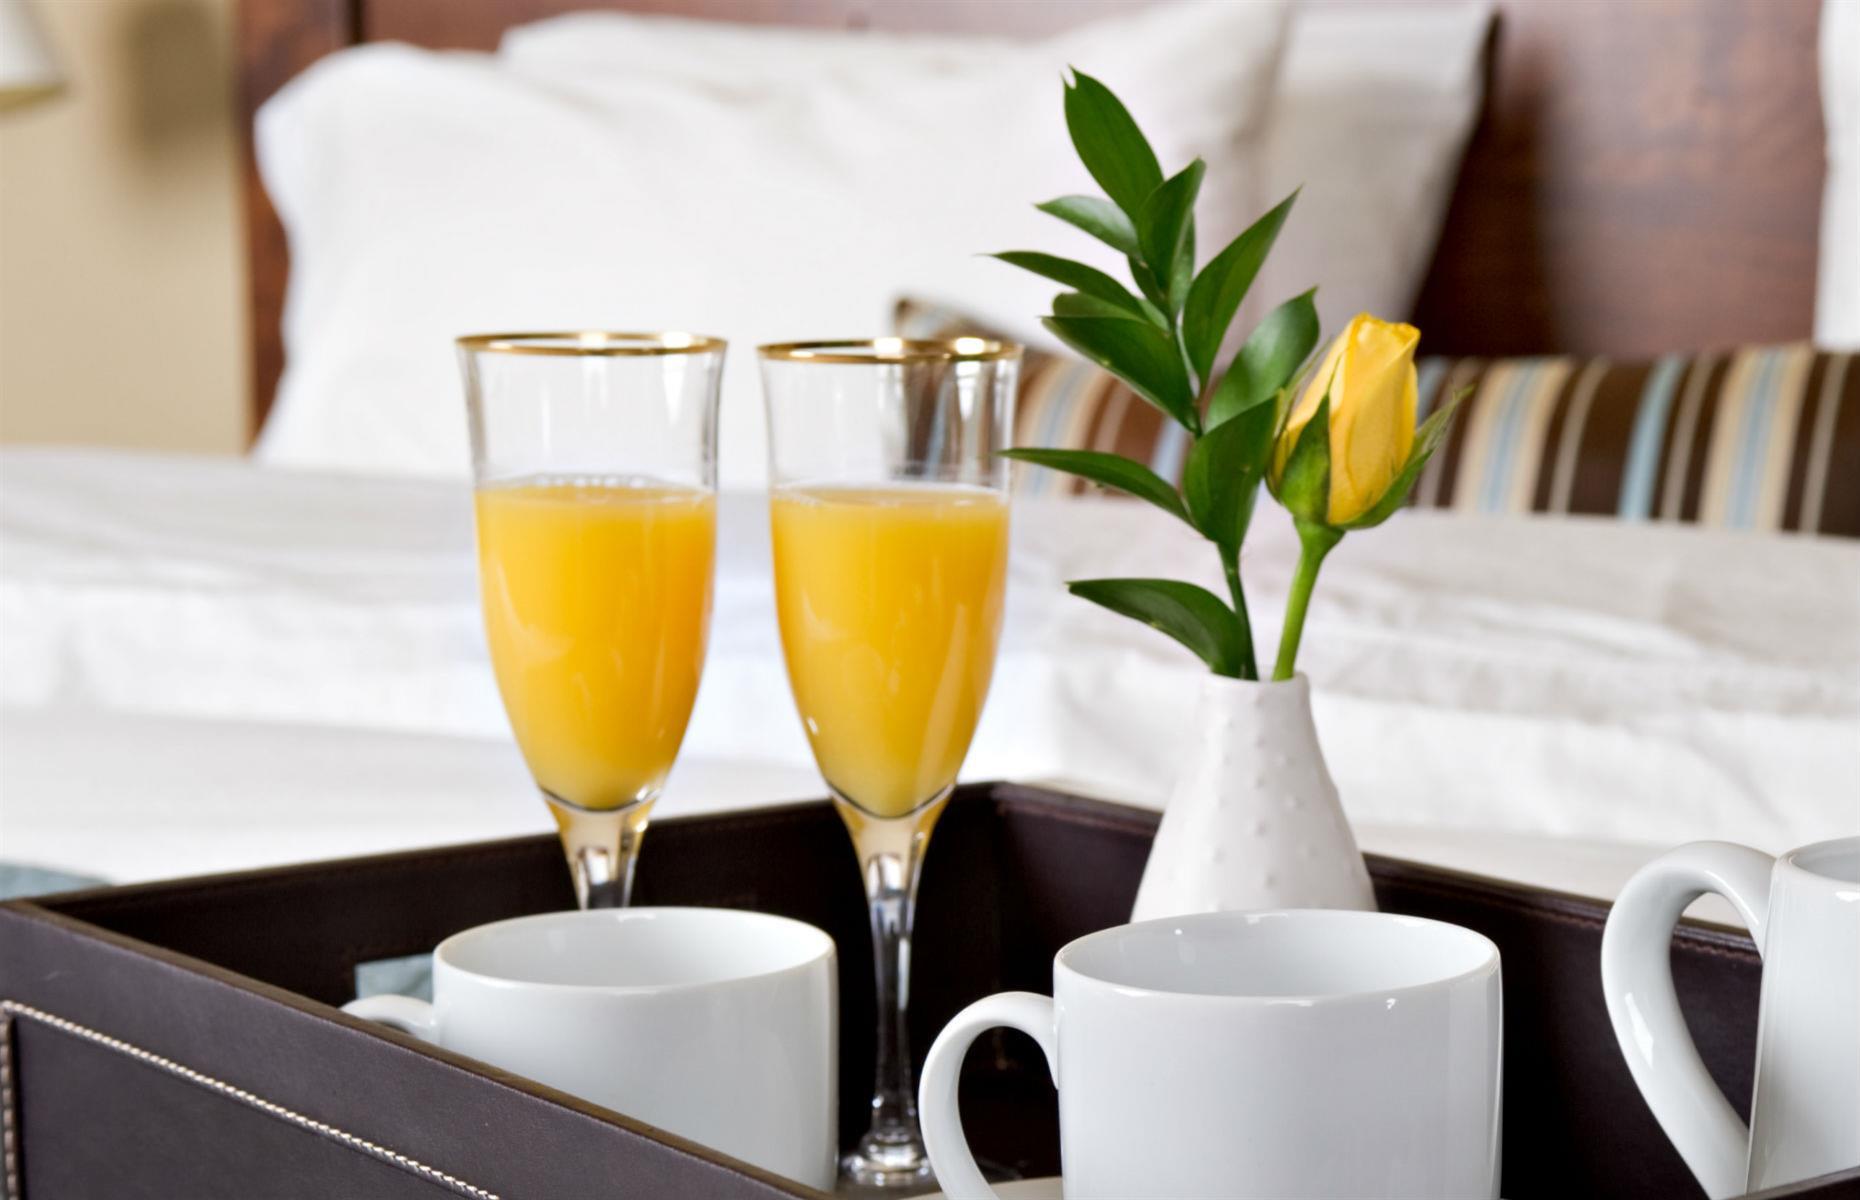 <p>Some hotels may leave you with a couple of fresh flowers to welcome you into the room. You’re welcome to take these with you, although we’d rather not imagine what they’ll look like after being stuffed into a carry on.</p>